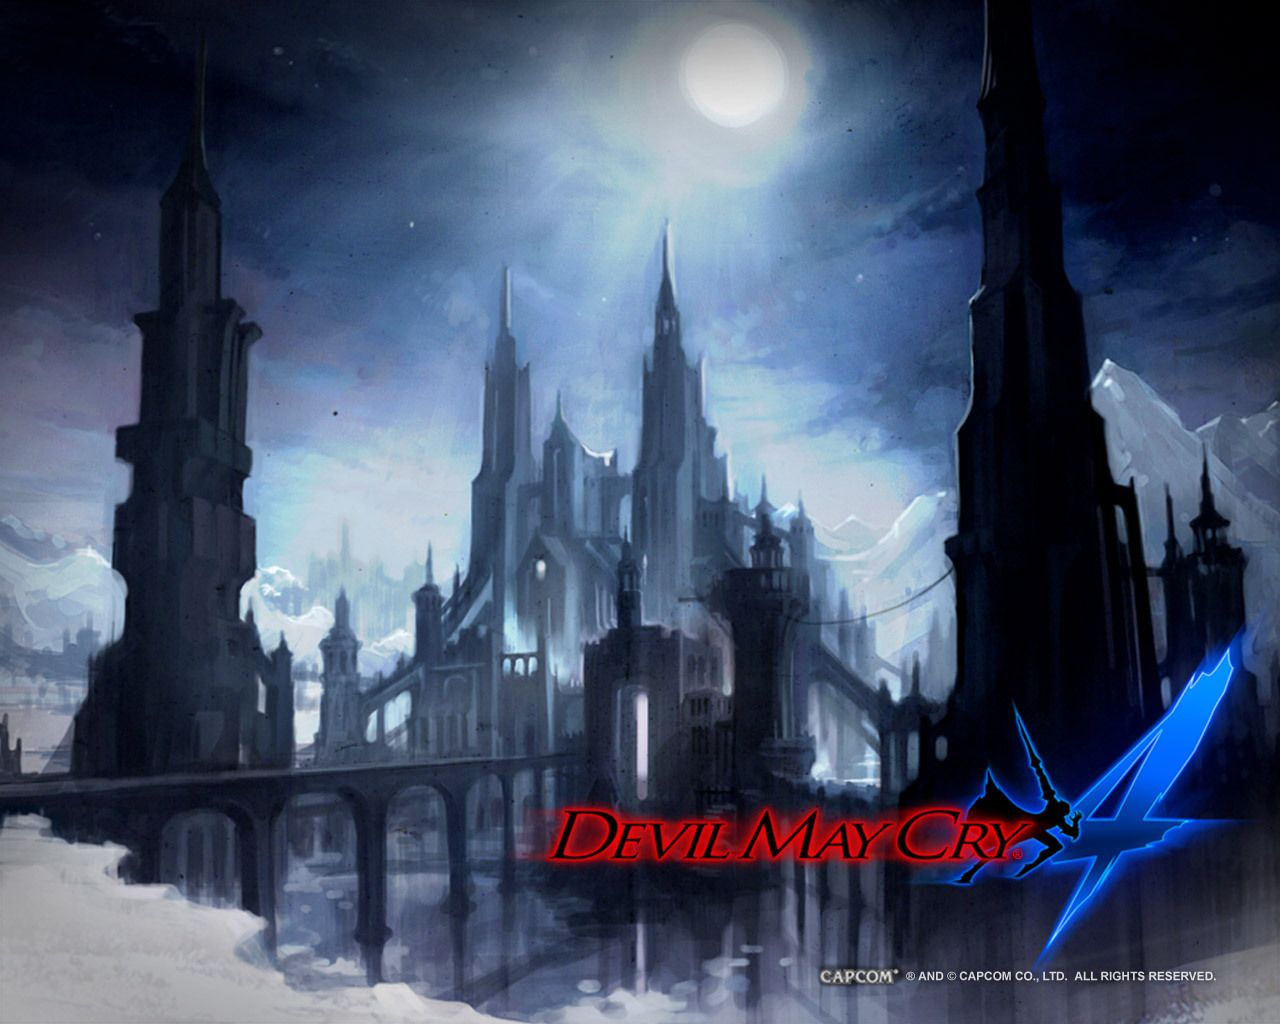 Devil May Cry 4 - Devil May Cry 4 Wallpaper 10867353 - Fanpop